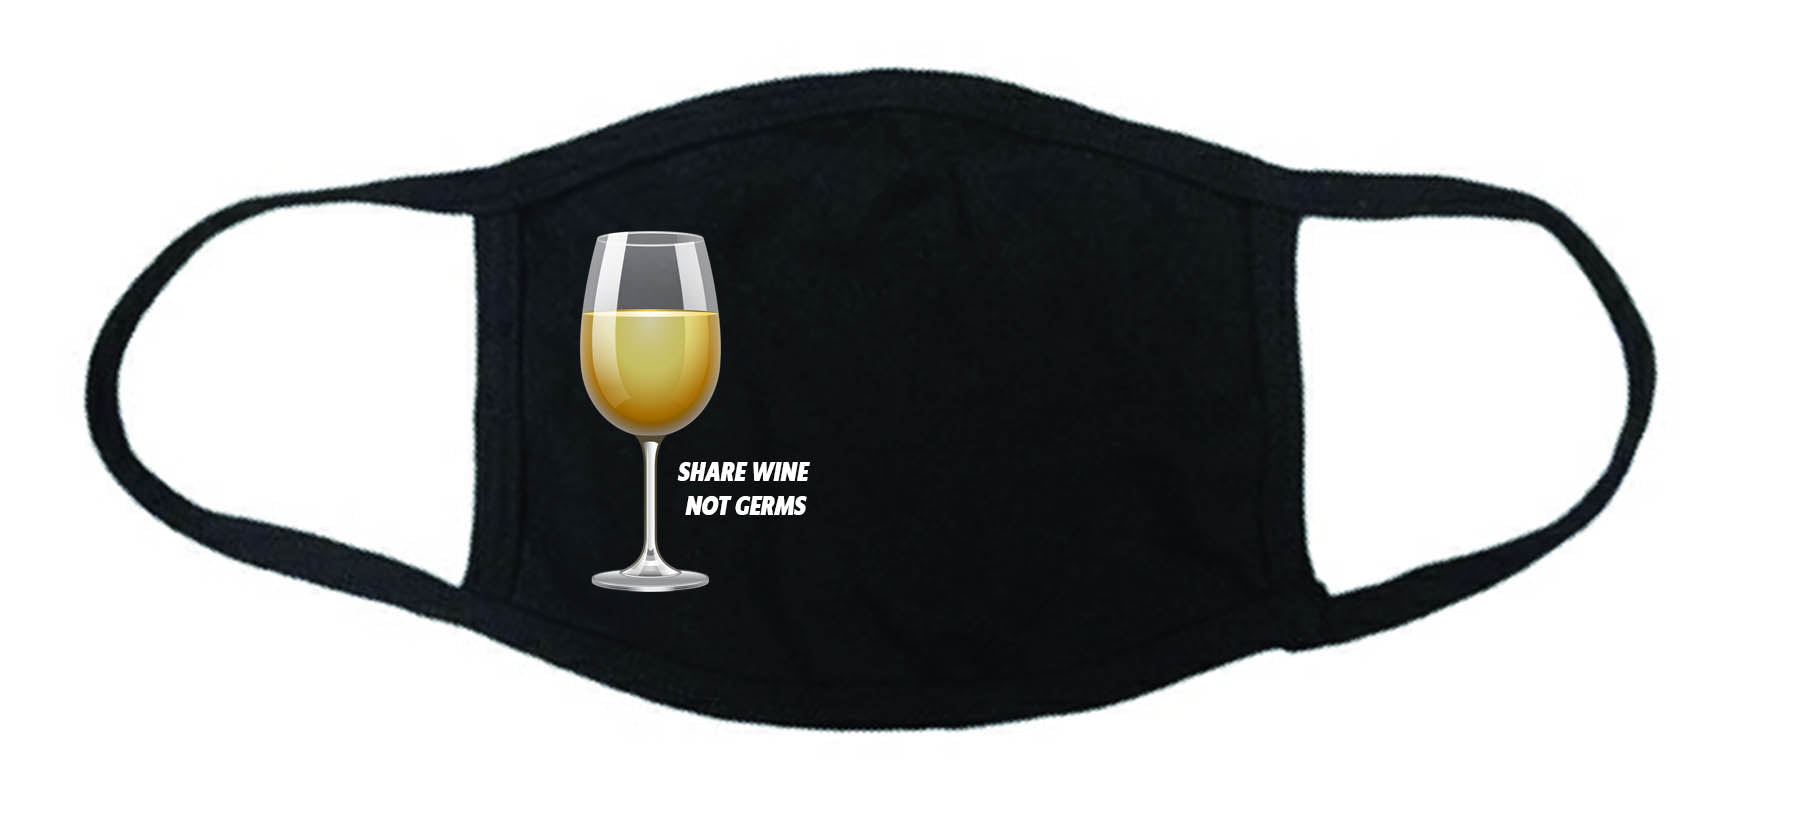 Share Wine Not Germs Face Mask, Masks